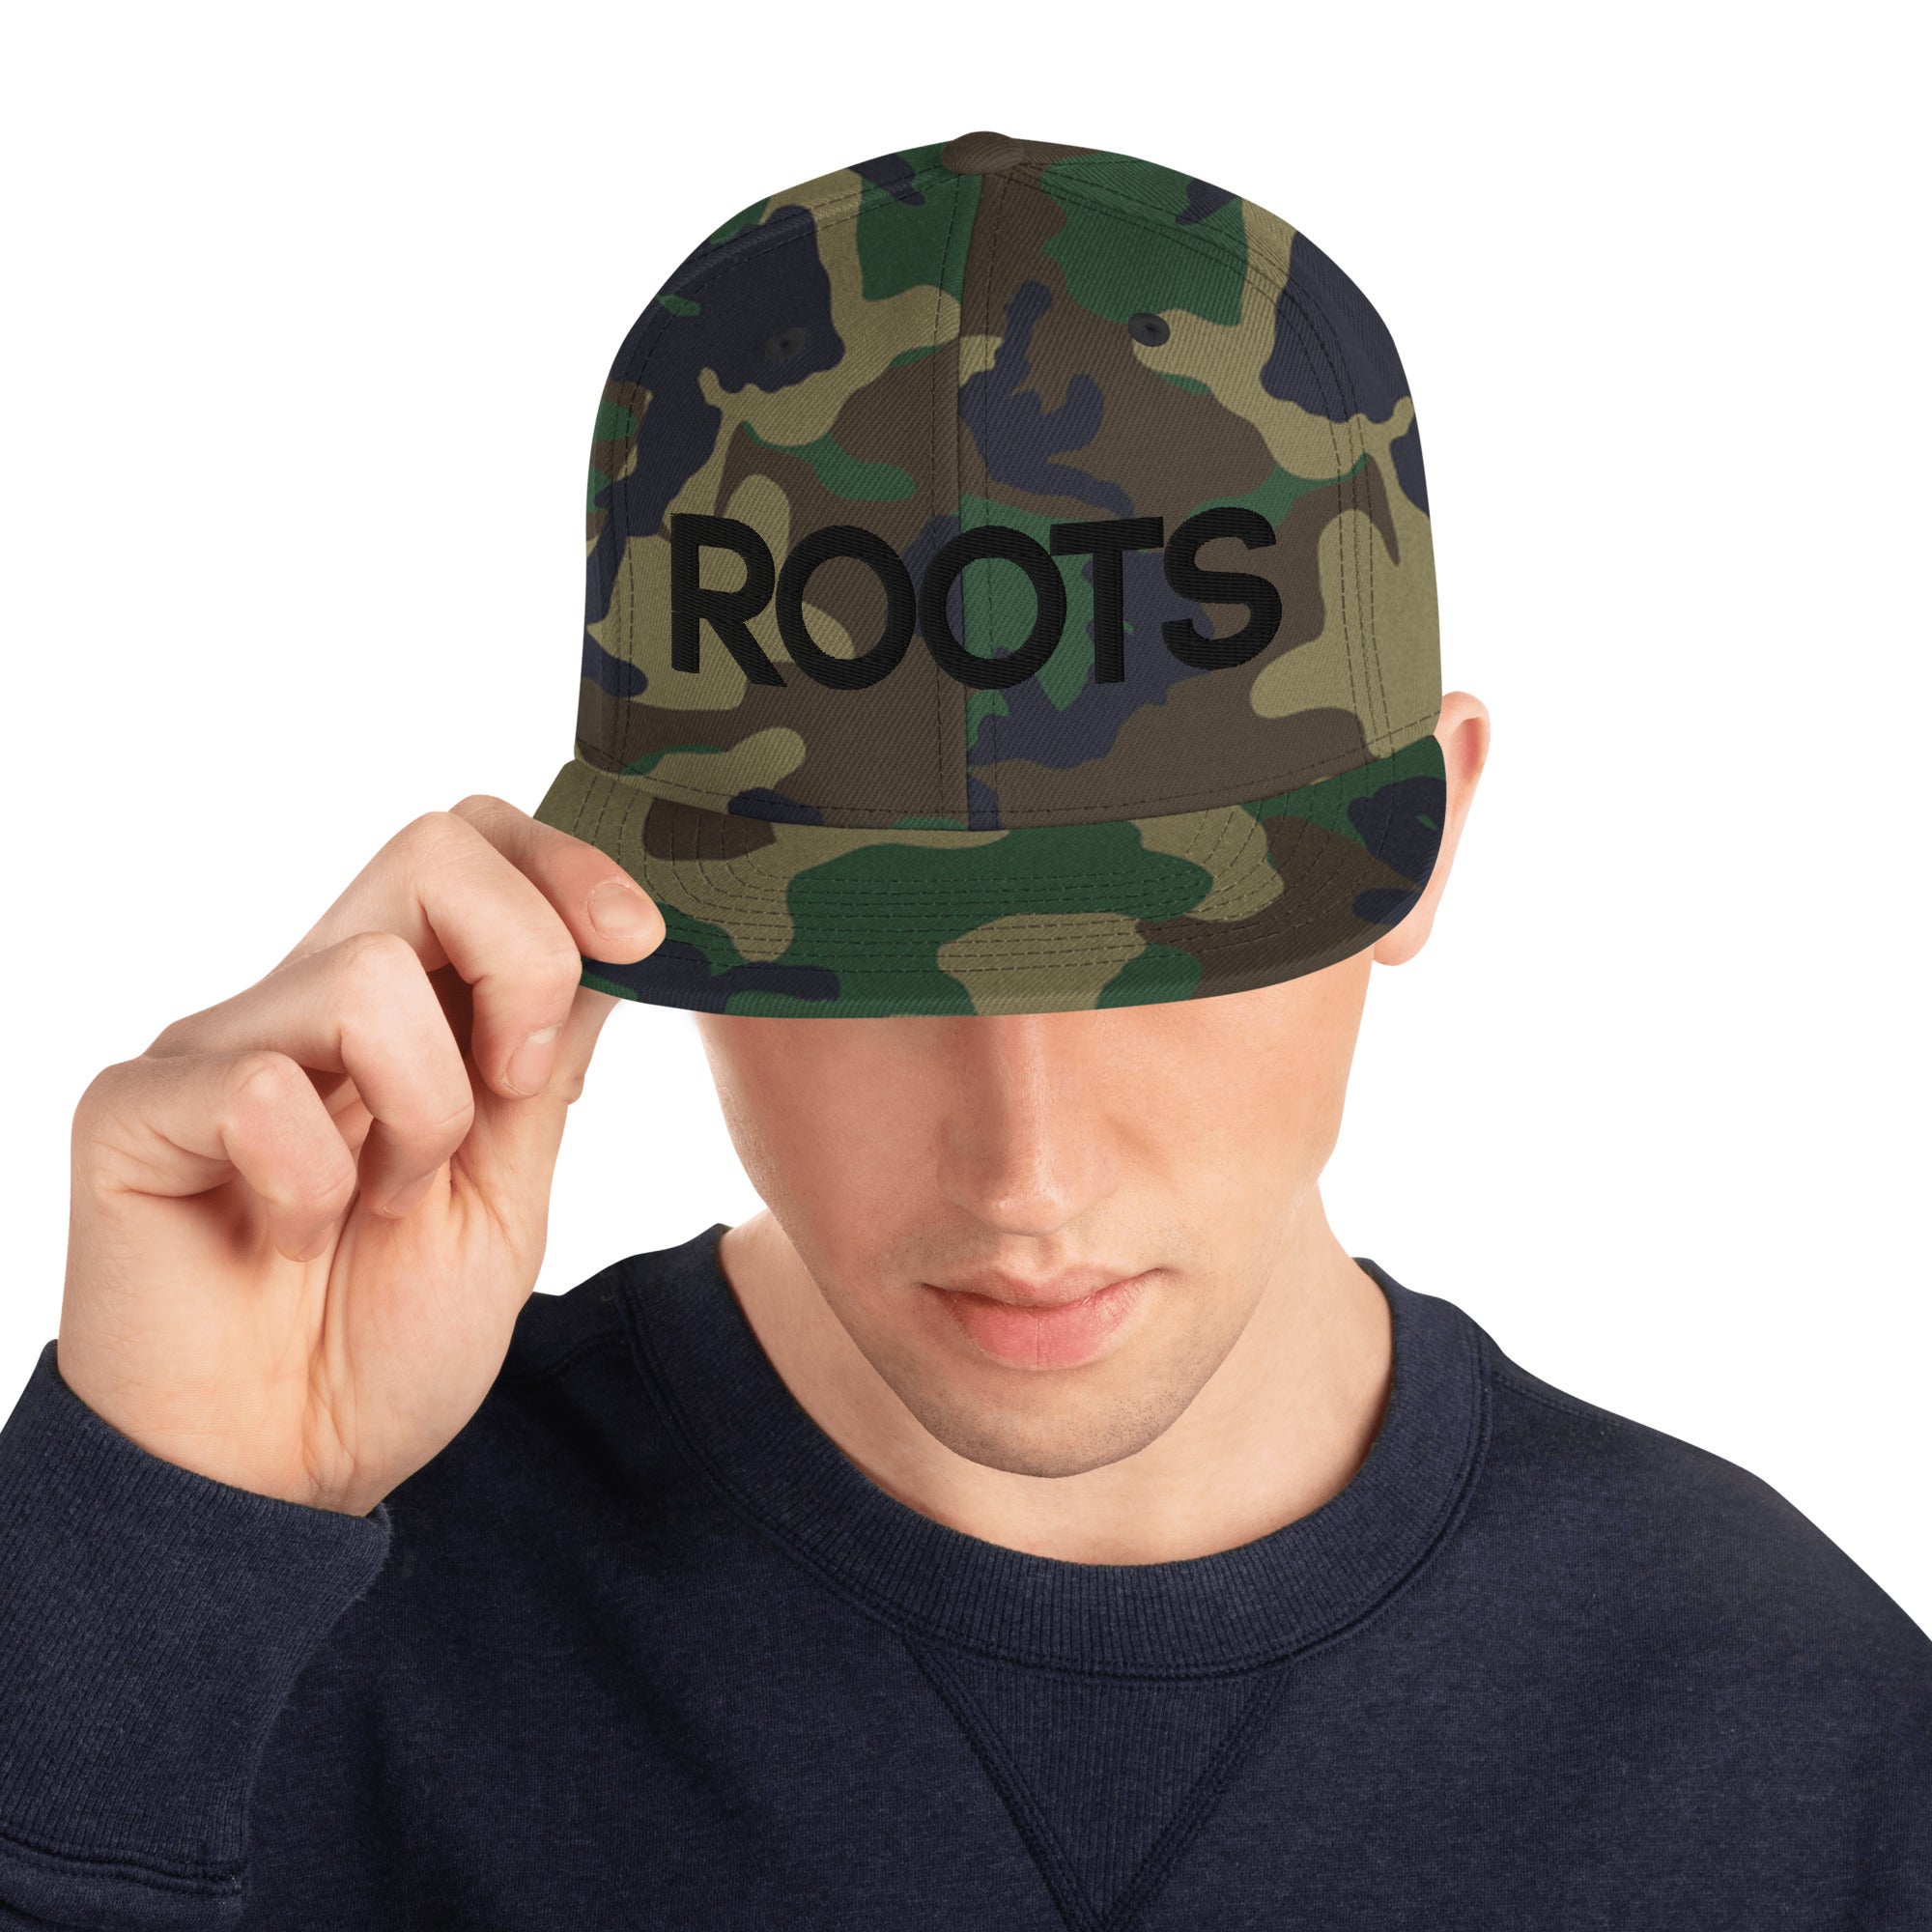 Roots Baseball Jersey – The Roots Clothing